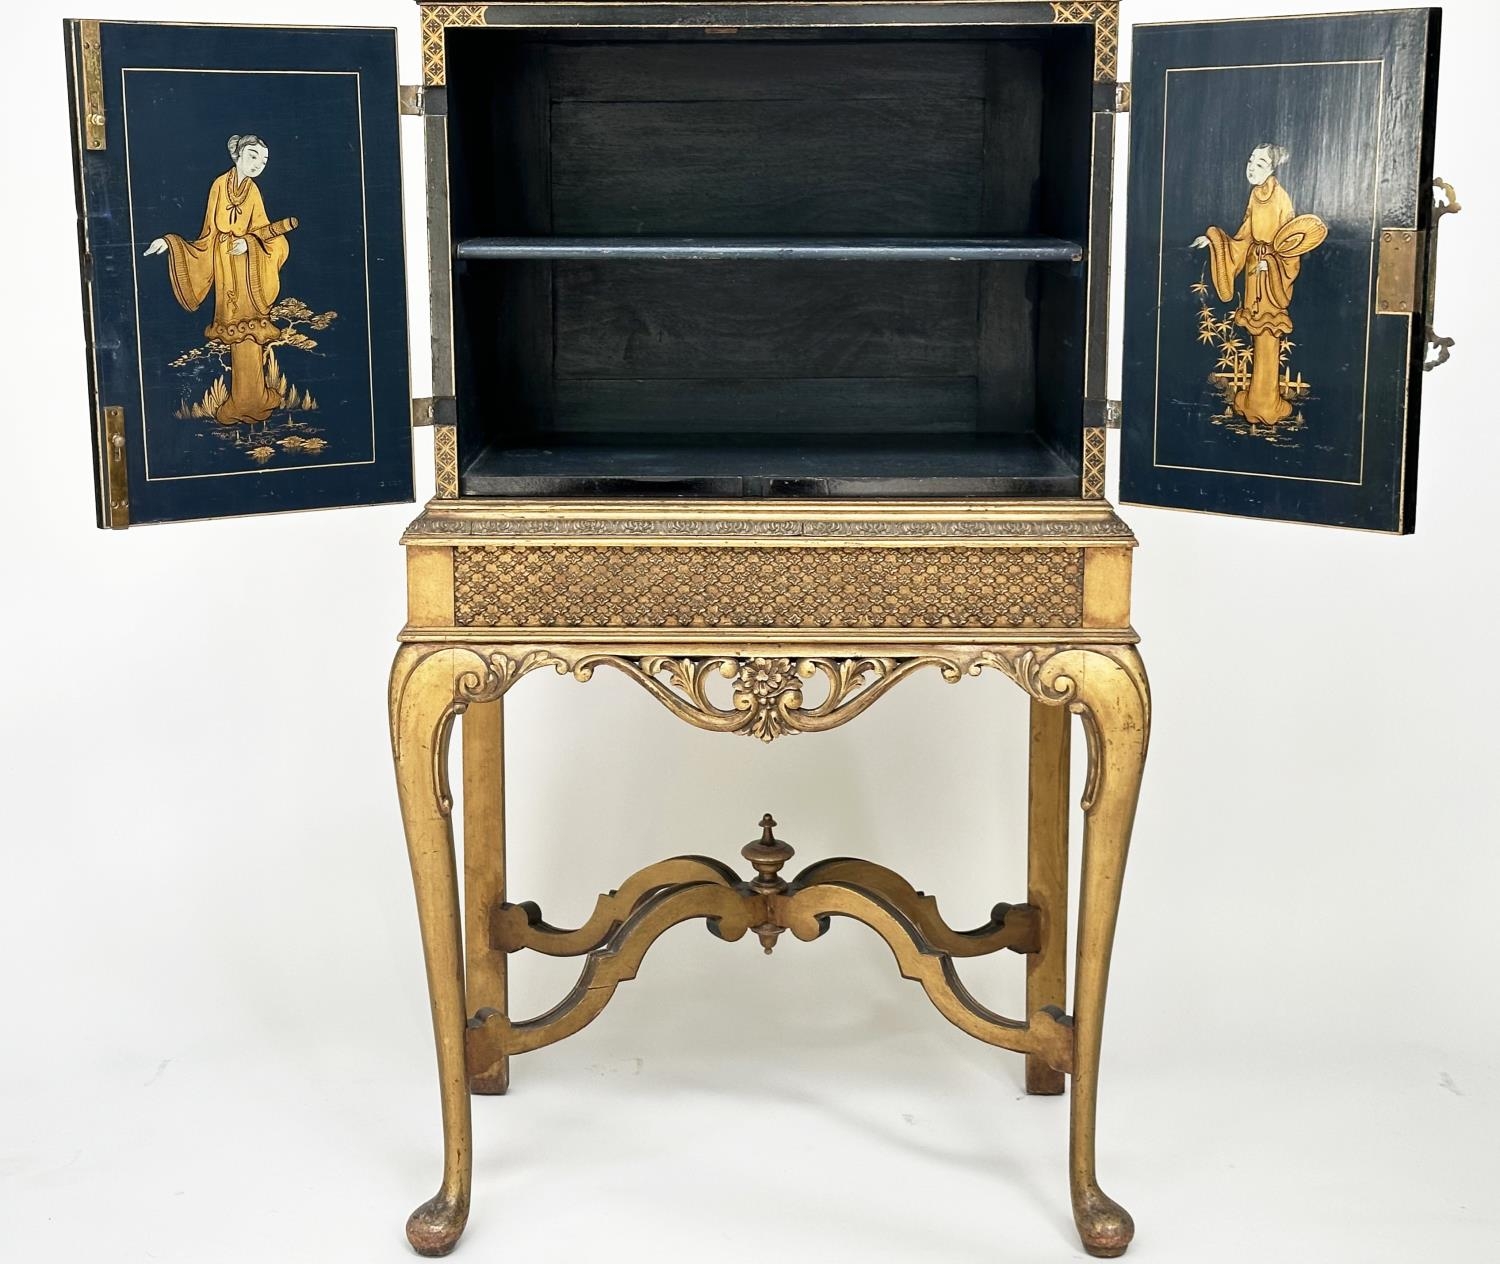 CABINET ON STAND, early 20th century English lacquered and gilt chinoiserie decorated, silvered - Image 8 of 11